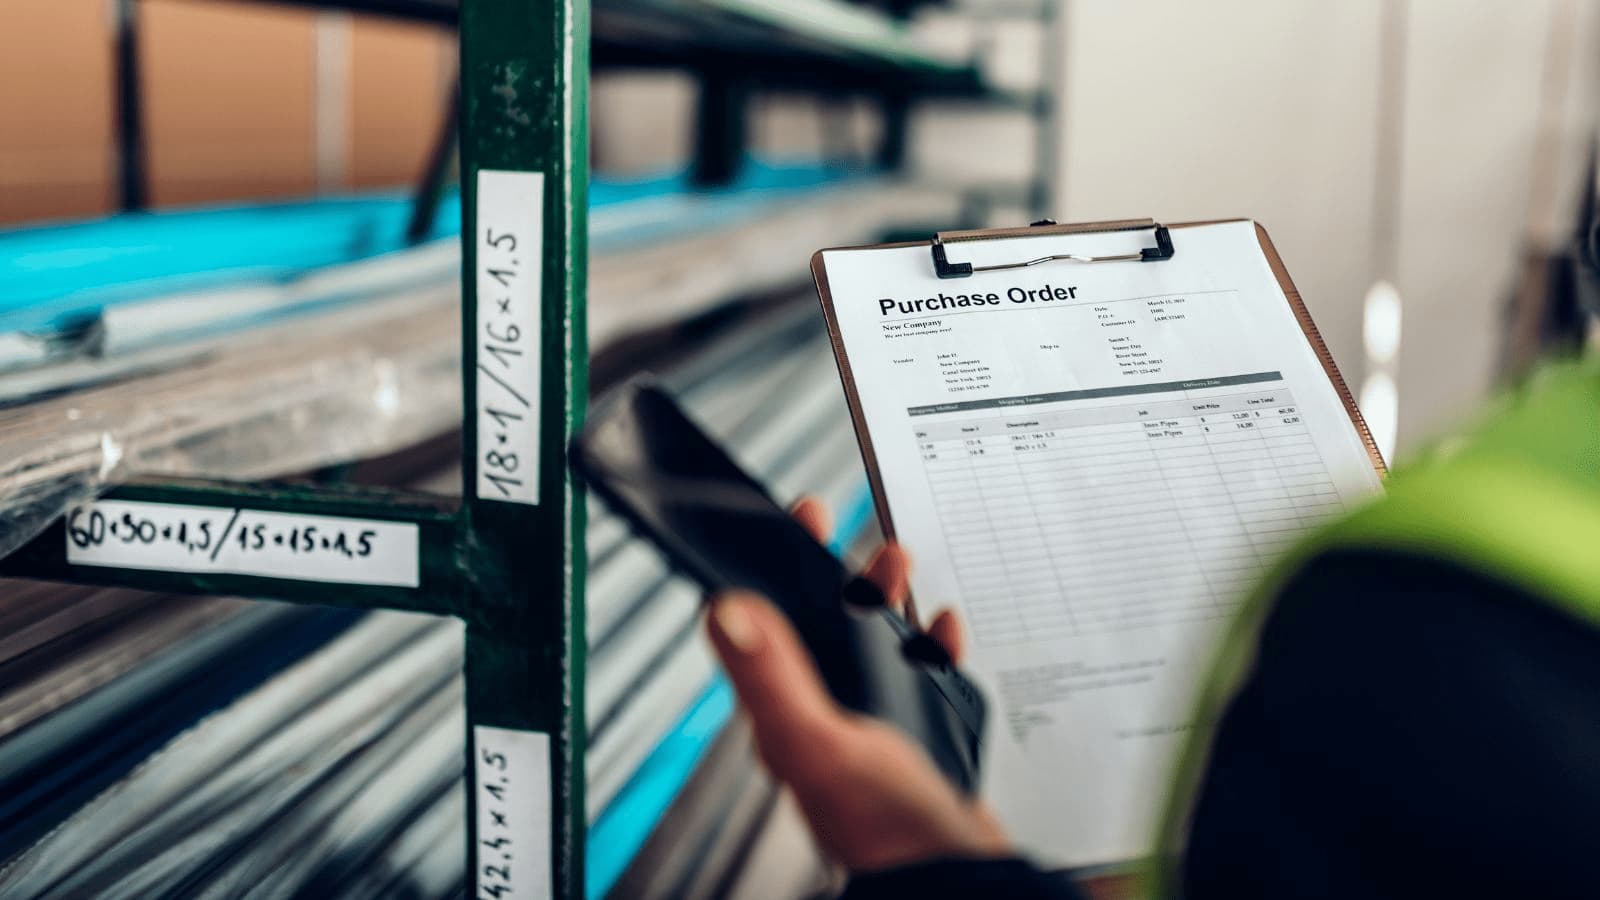 A worker uses a smart device for purchase order automation tool while investigating inventory levels.